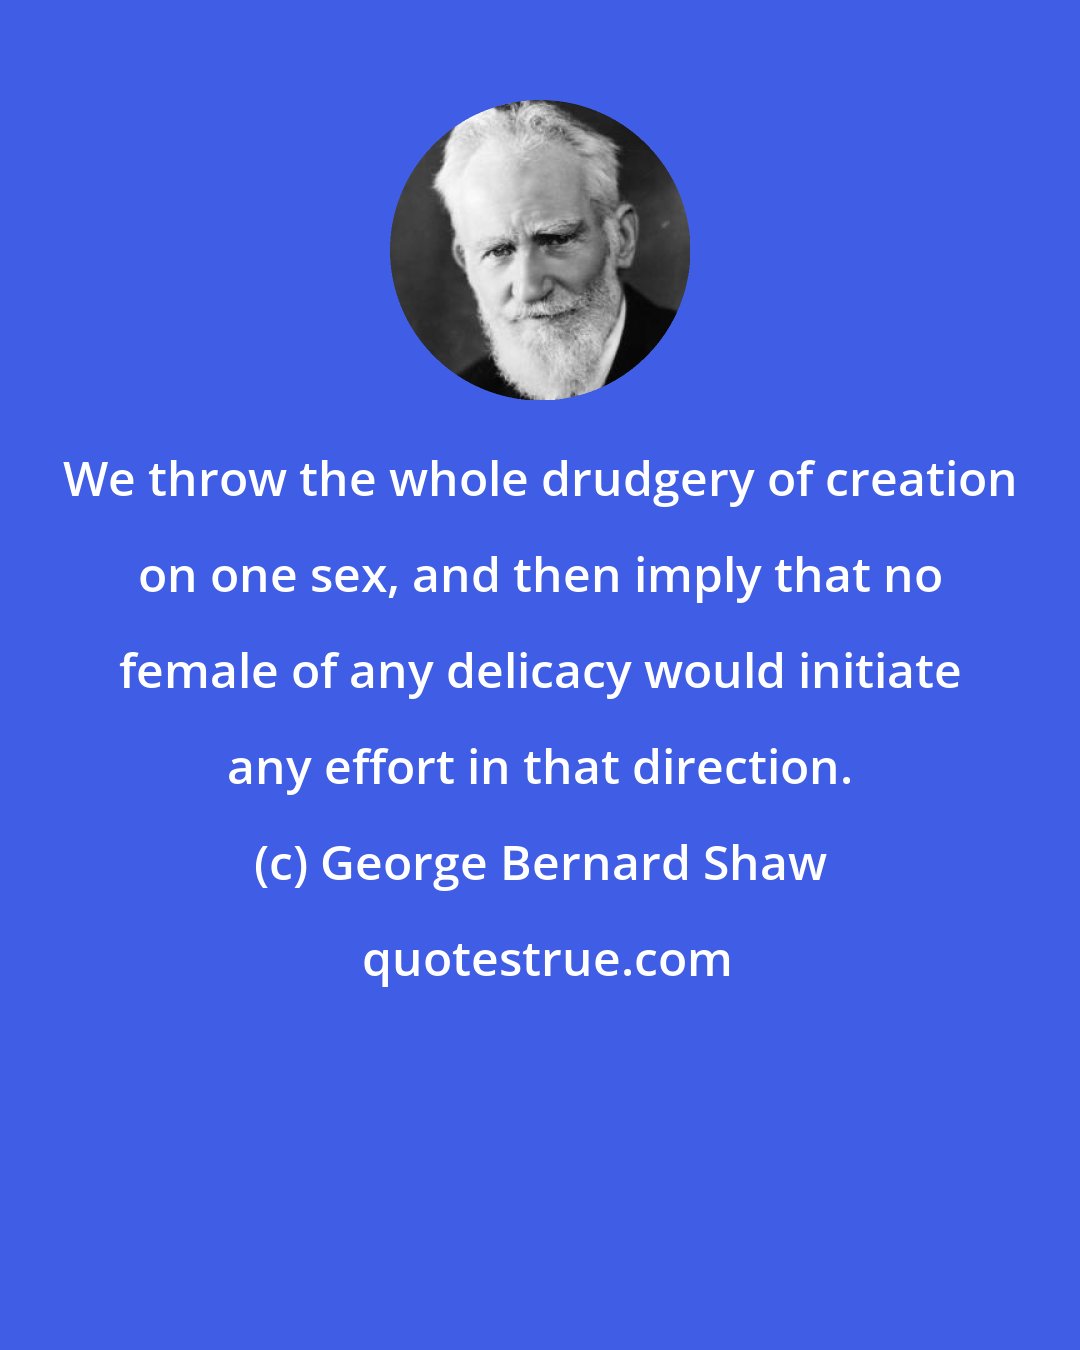 George Bernard Shaw: We throw the whole drudgery of creation on one sex, and then imply that no female of any delicacy would initiate any effort in that direction.